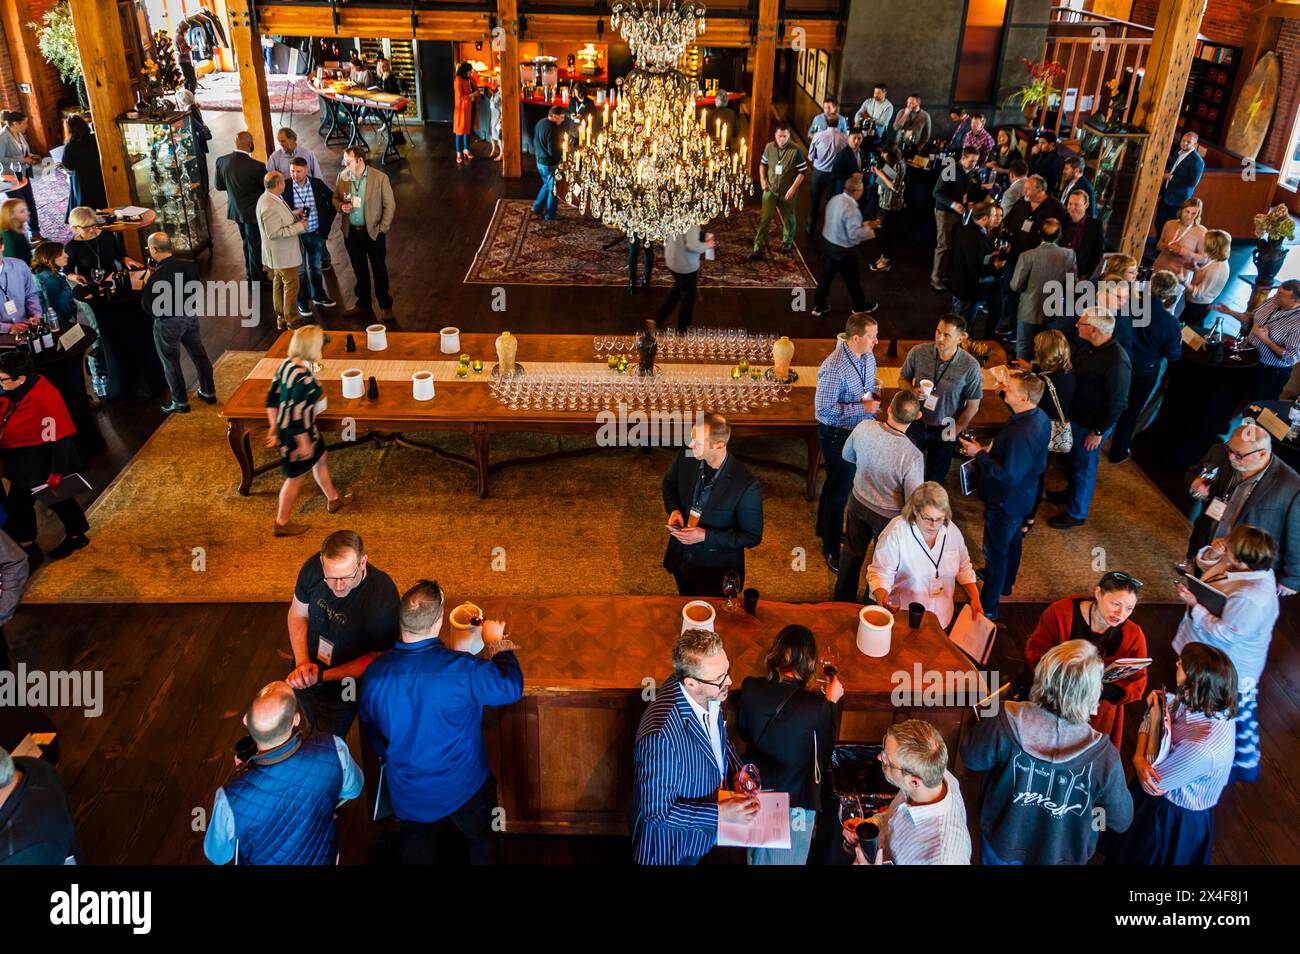 USA, Washington State, Walla Walla. Guests converge on wine tasting event in Walla Walla. (Editorial Use Only) Stock Photo